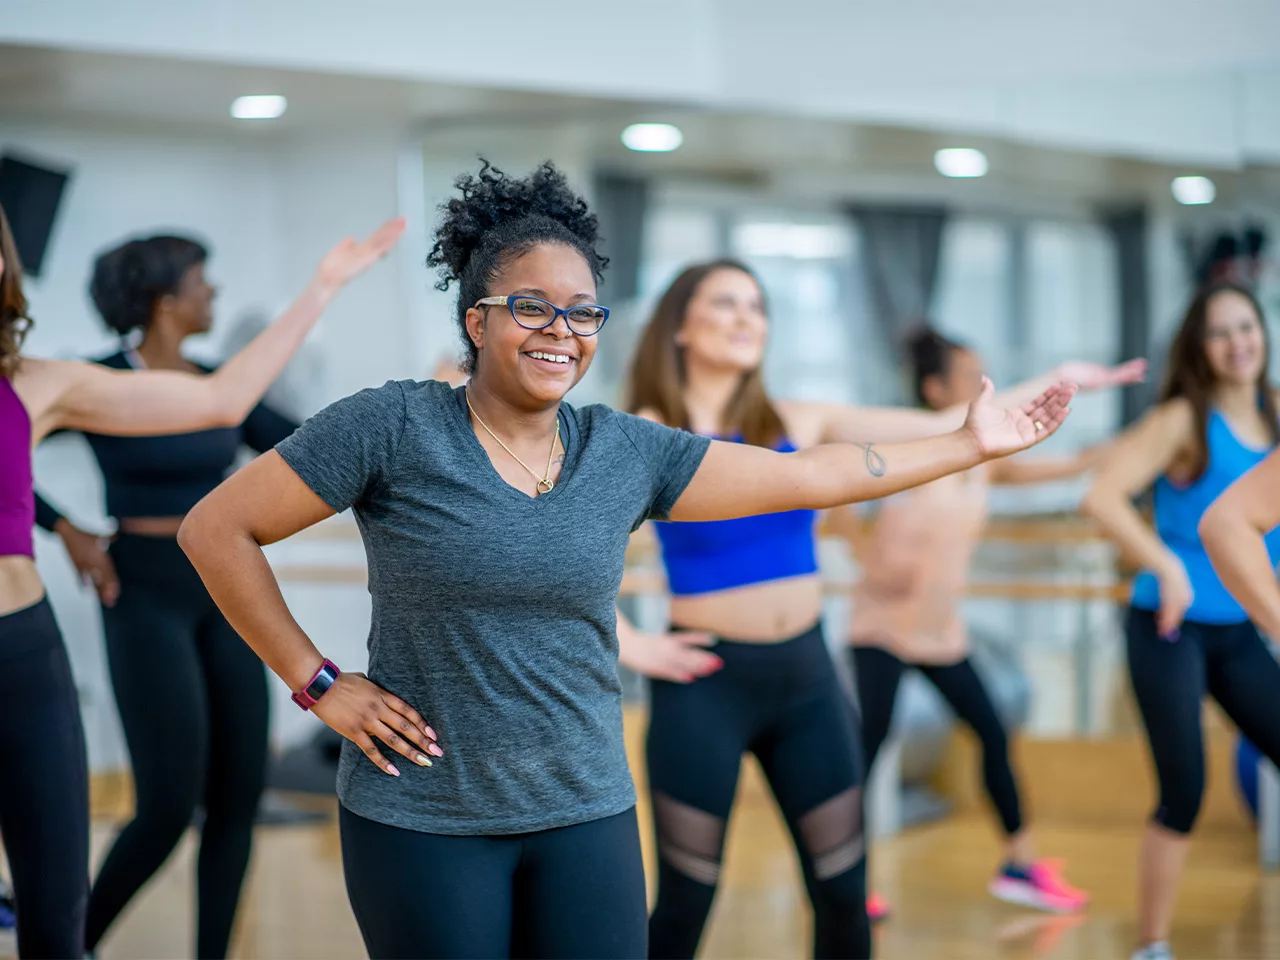 A woman gestures with her hands on her hips during a dance class.